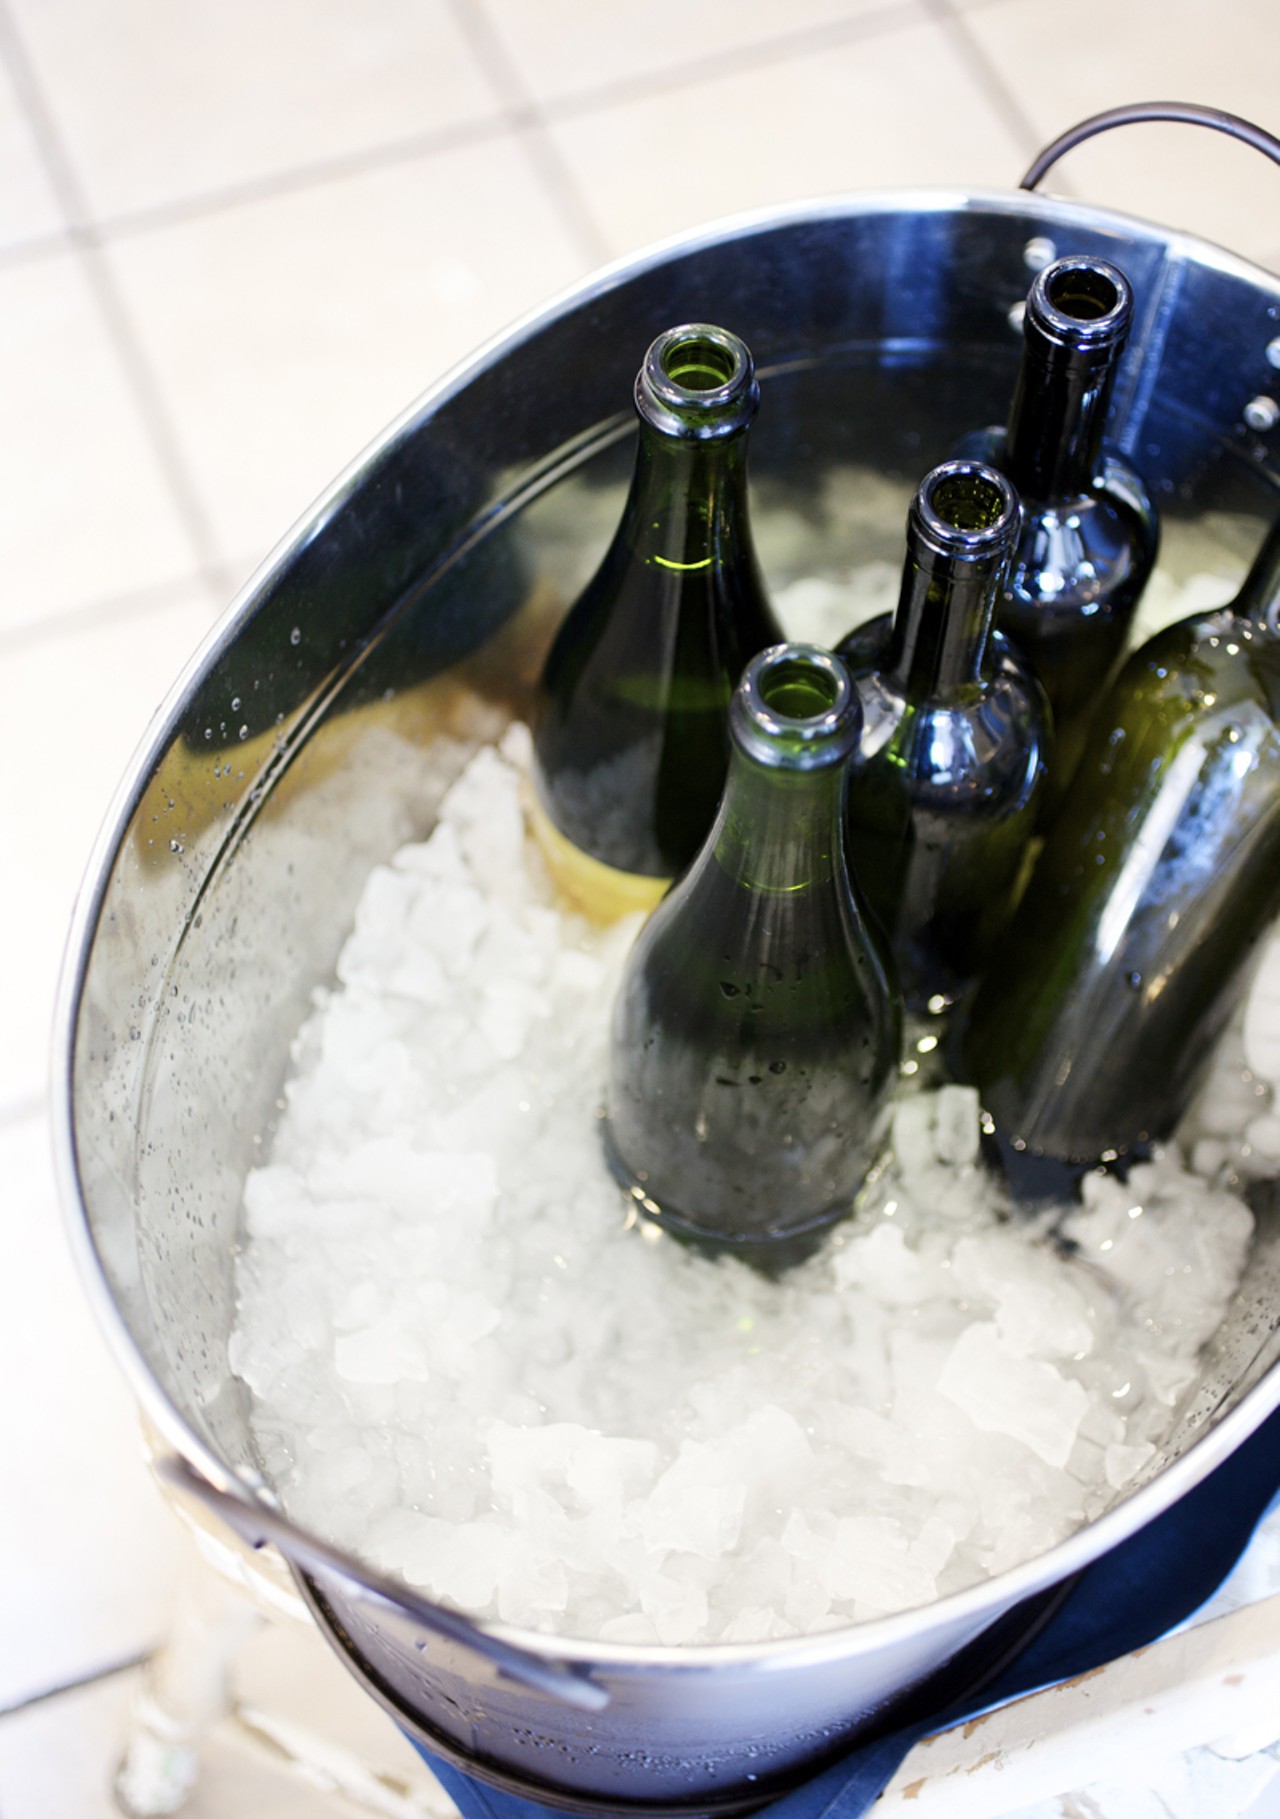 The bottles of water for table service in a rustic ice bucket near the entrance to the restaurant.